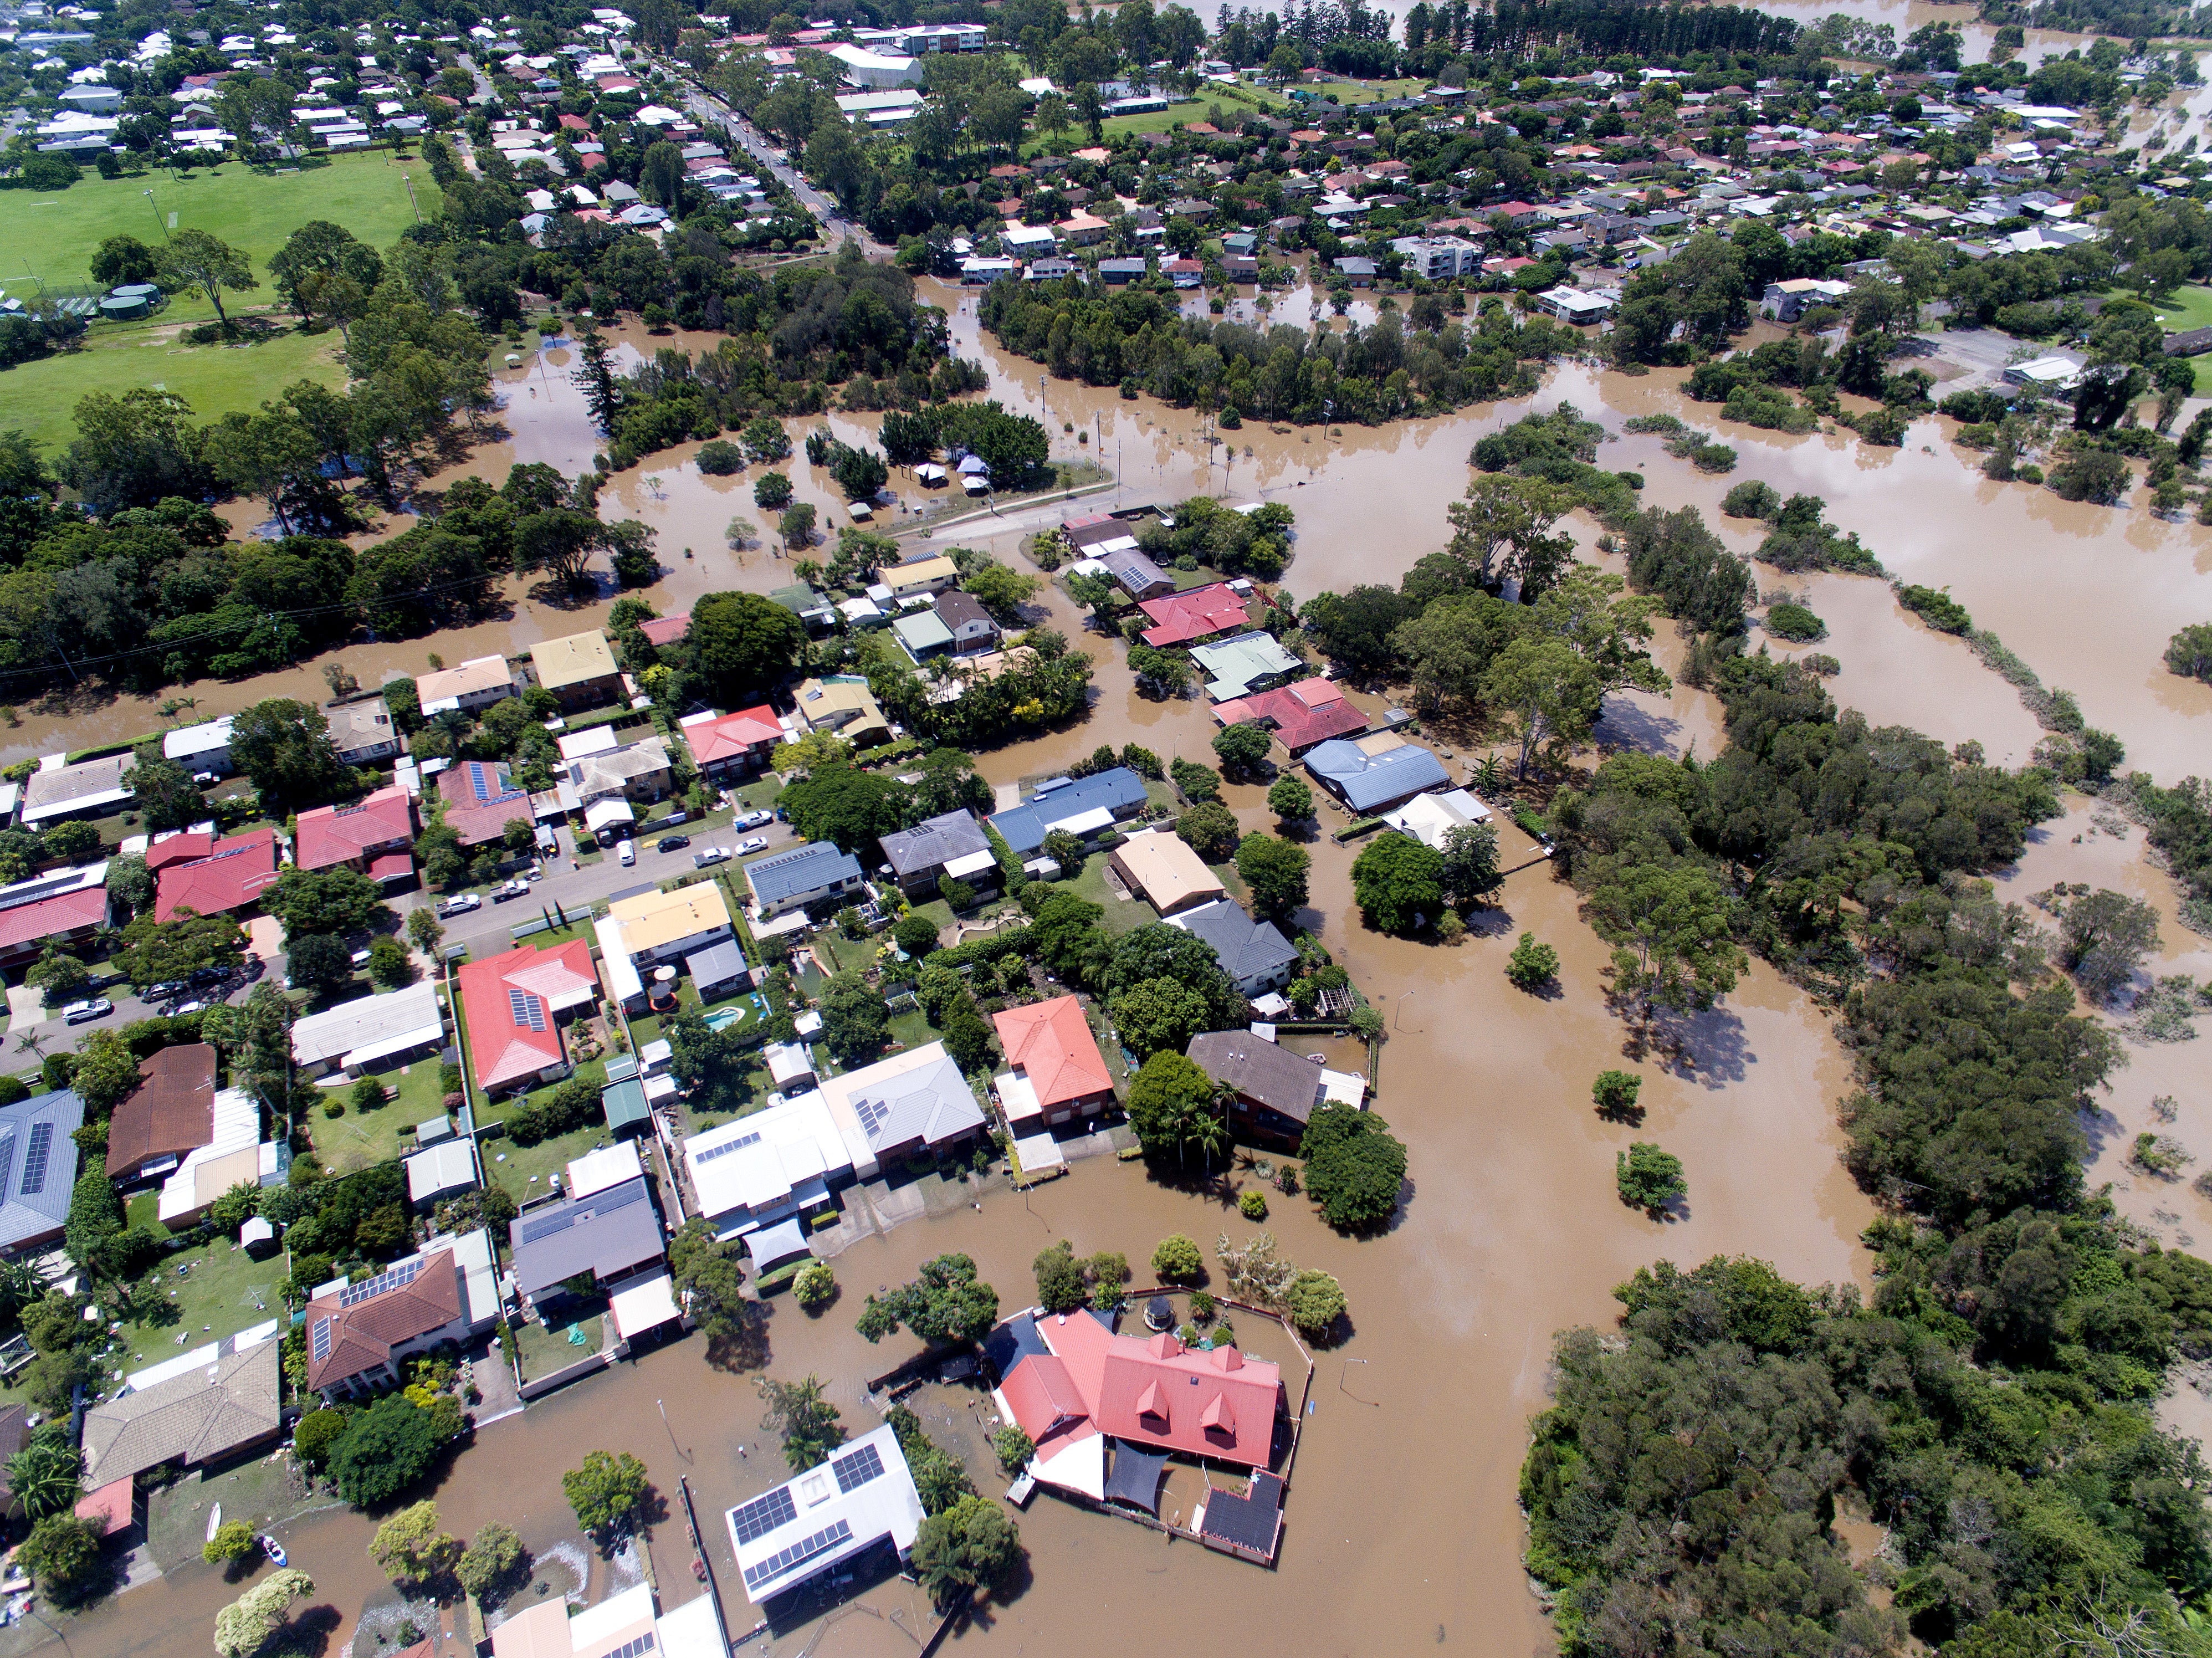 Homes in the suburb of Oxley are seen surrounded by flood waters on 1 March, 2022 in Brisbane, Australia